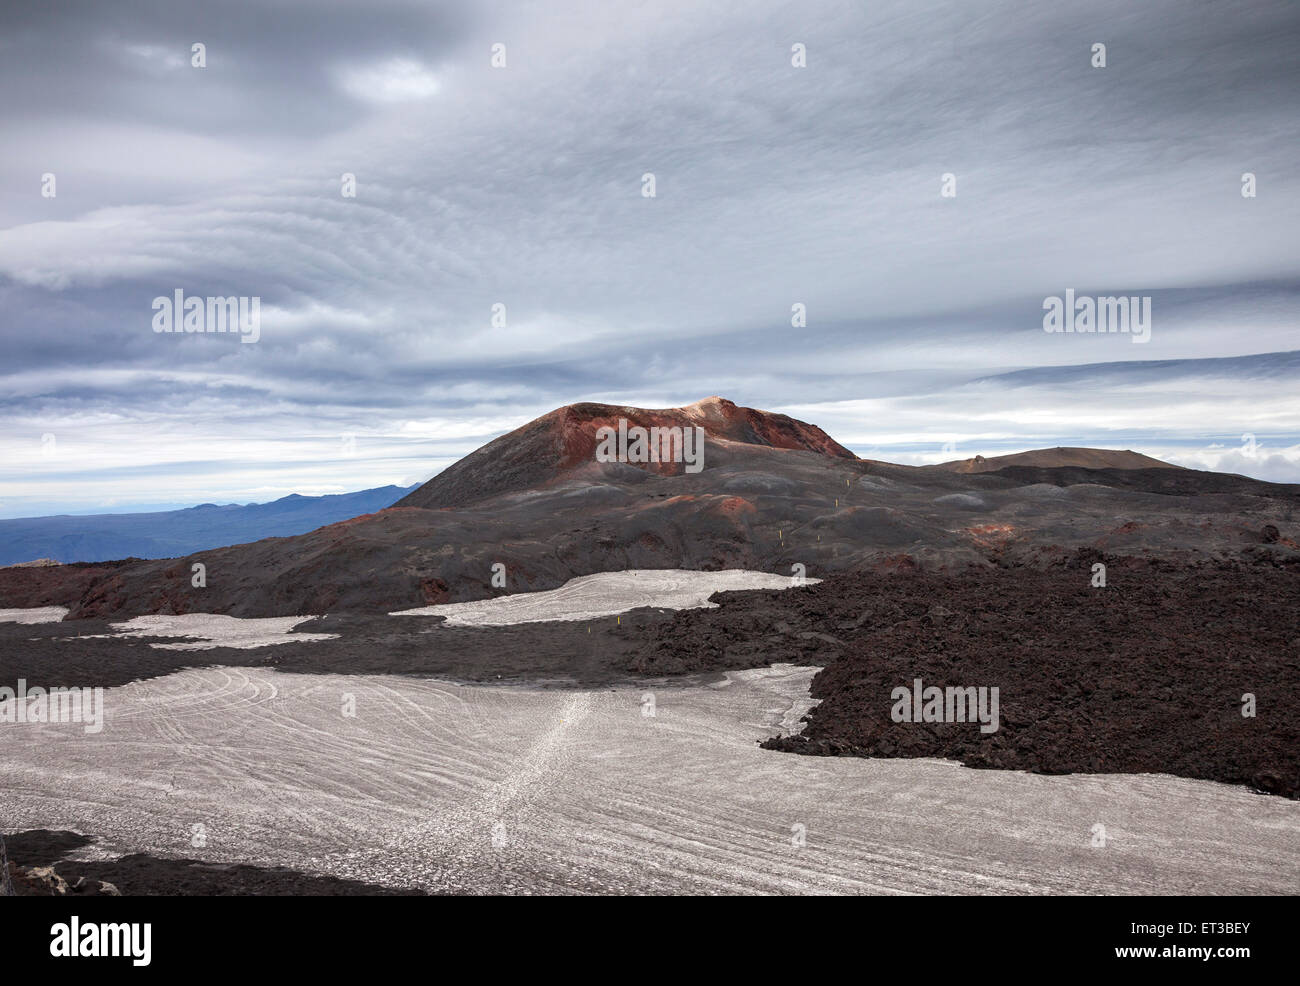 Initial Eruption Site of the Eyjafjallajokull Volcano in the Fimmvorouhals Pass with Craters and Hills of Magni and Modi Iceland Stock Photo